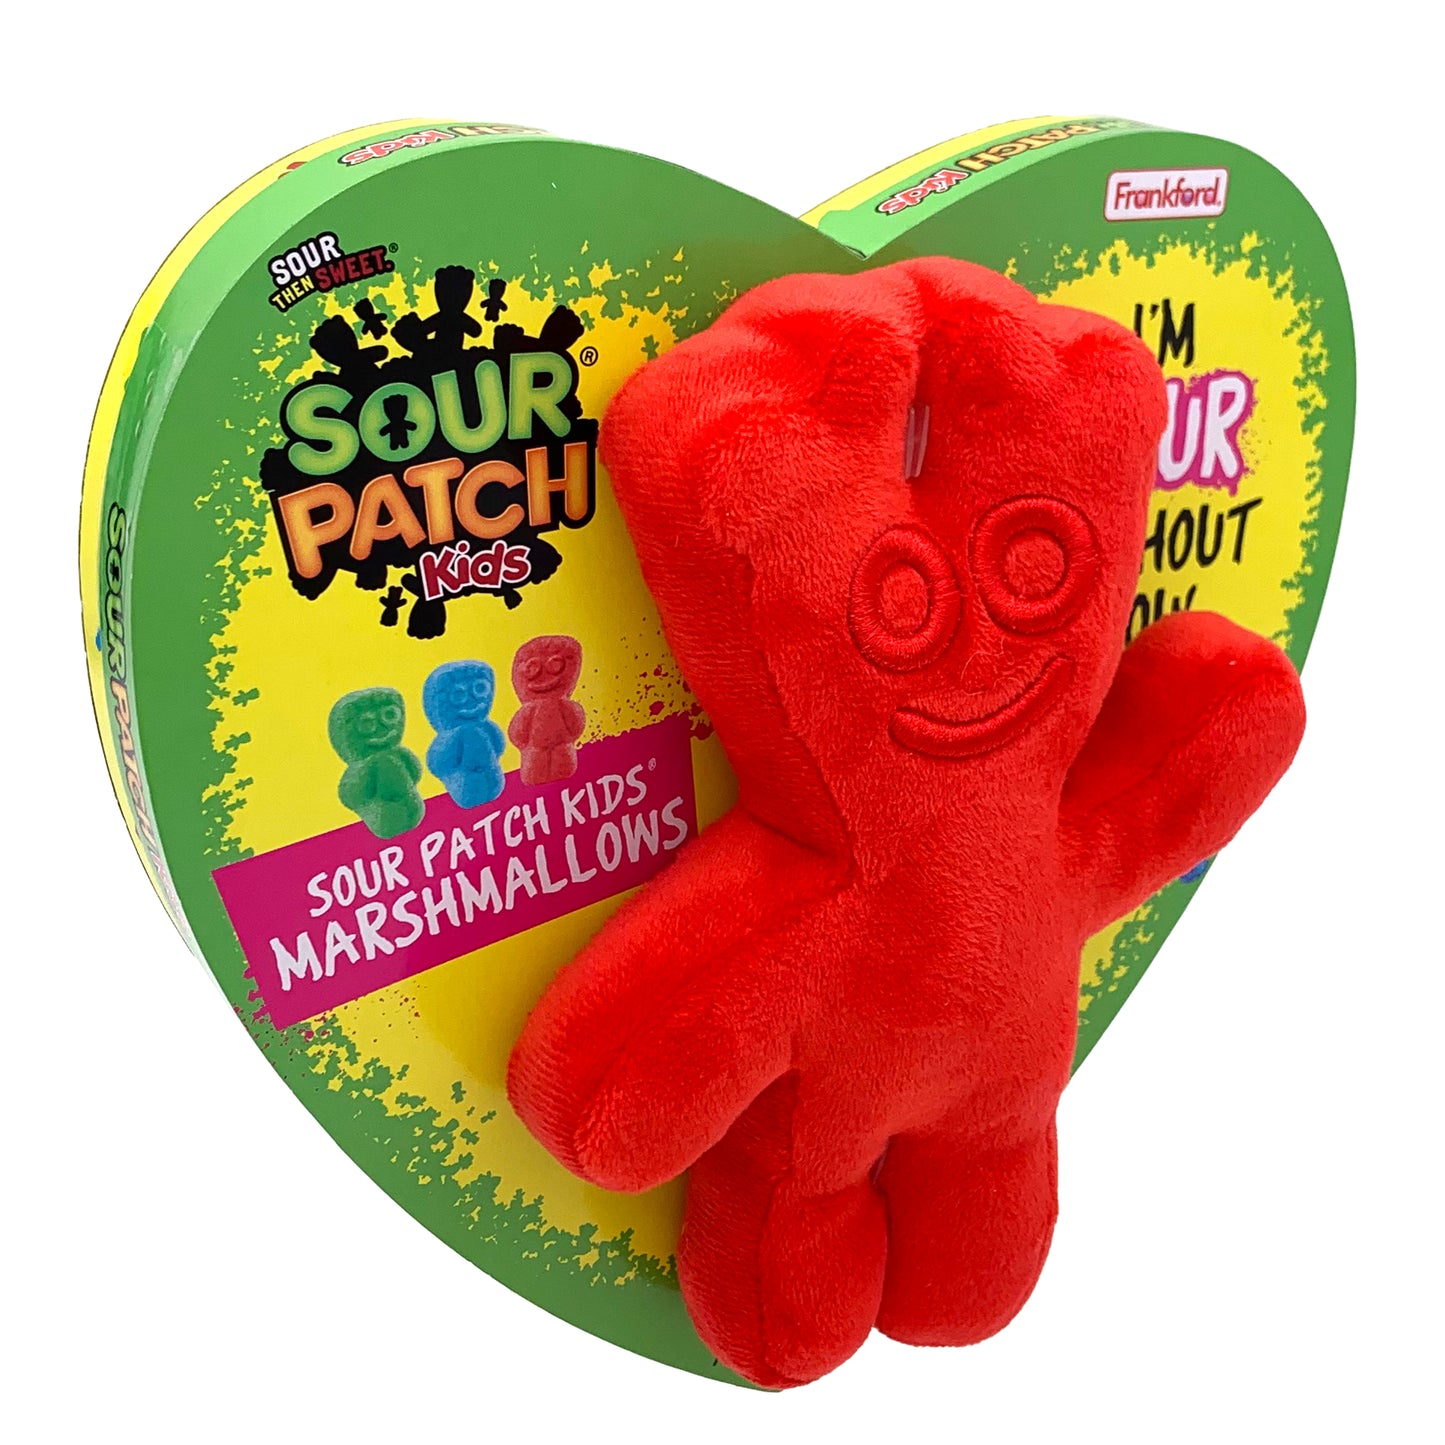 yellow heart shaped box with a green border and a red sour patch plush toy on the front